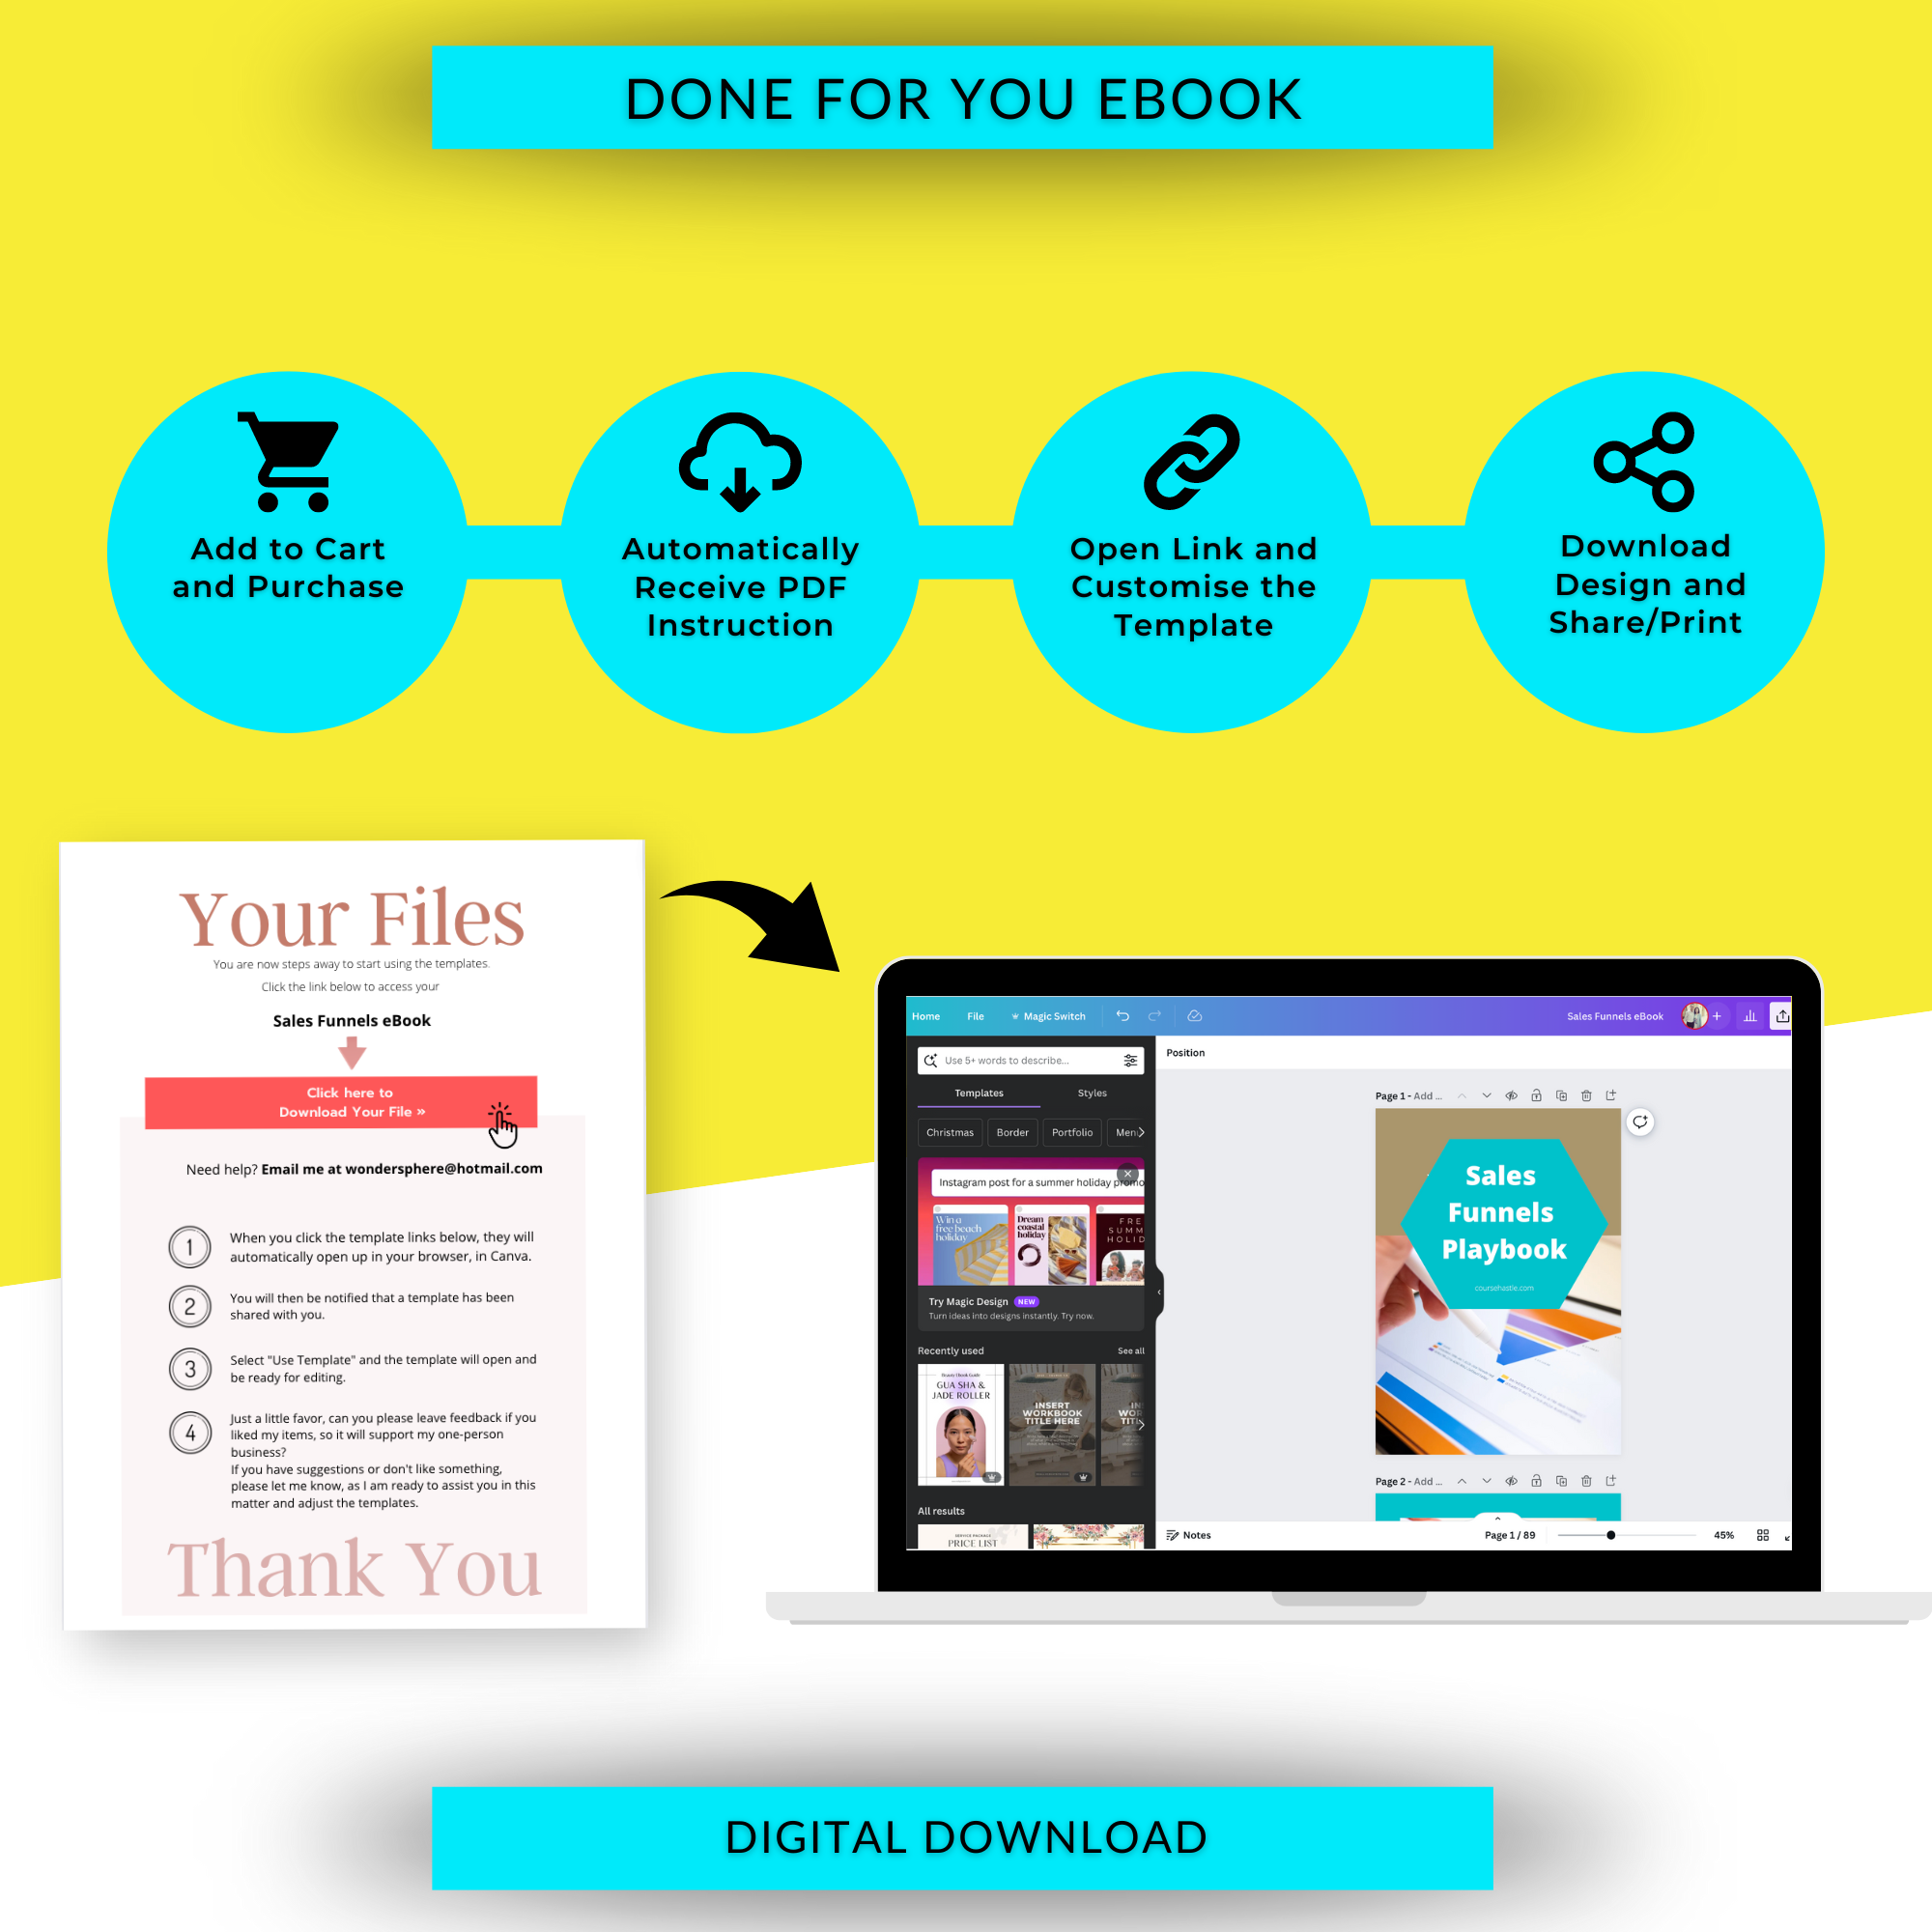 Done for You Sales Funnel Playbook in Canva | Editable A4 Size Canva Template